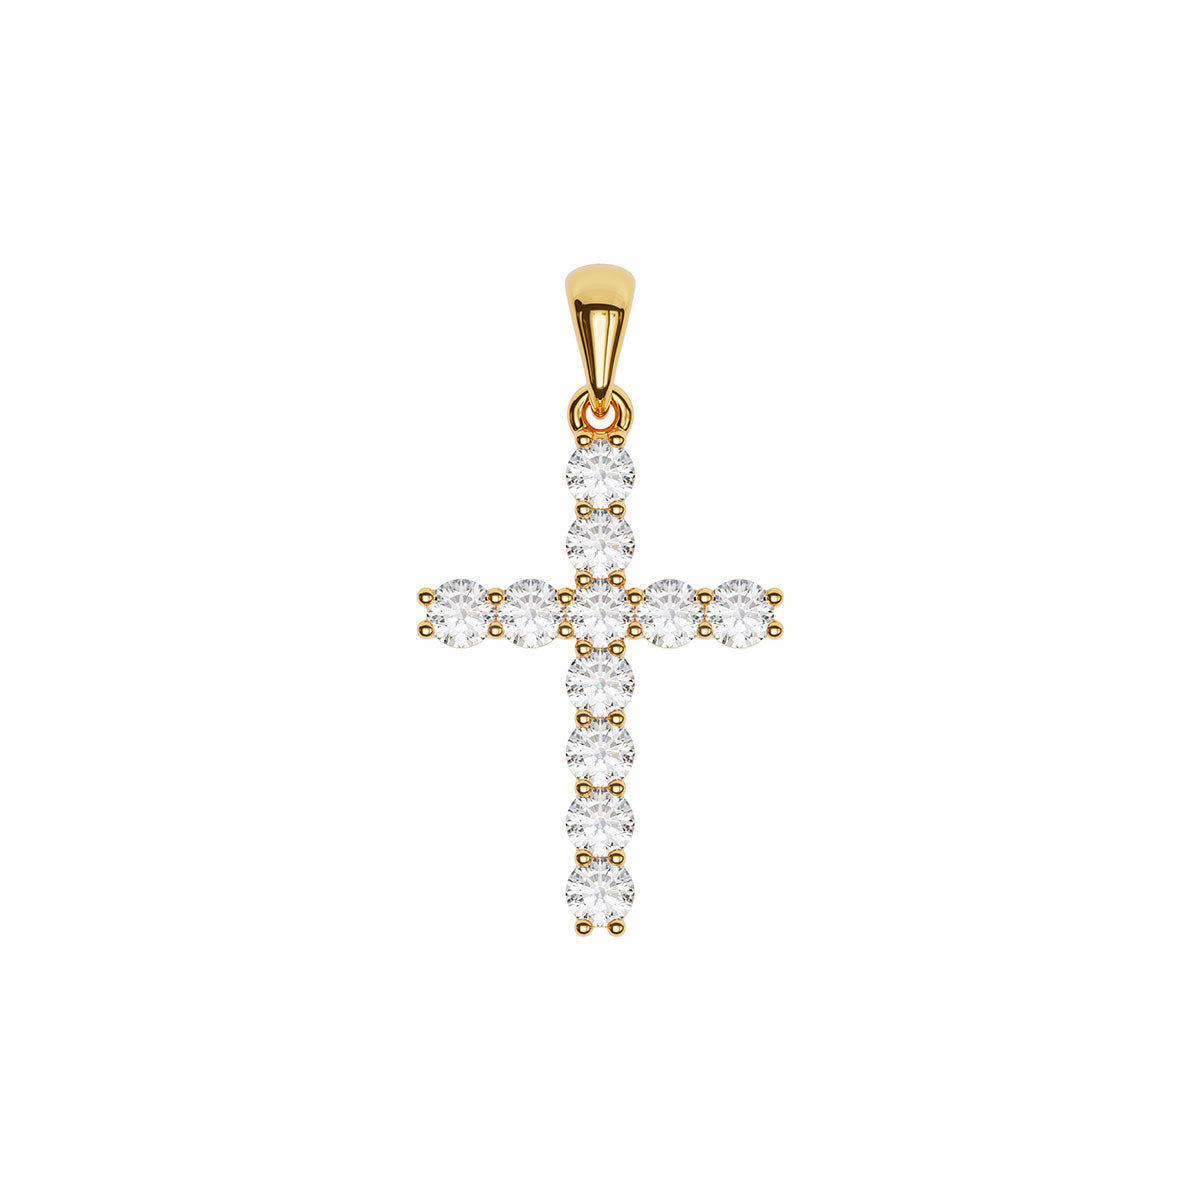 Standard Size Pavé Cross With 2.5mm Stones